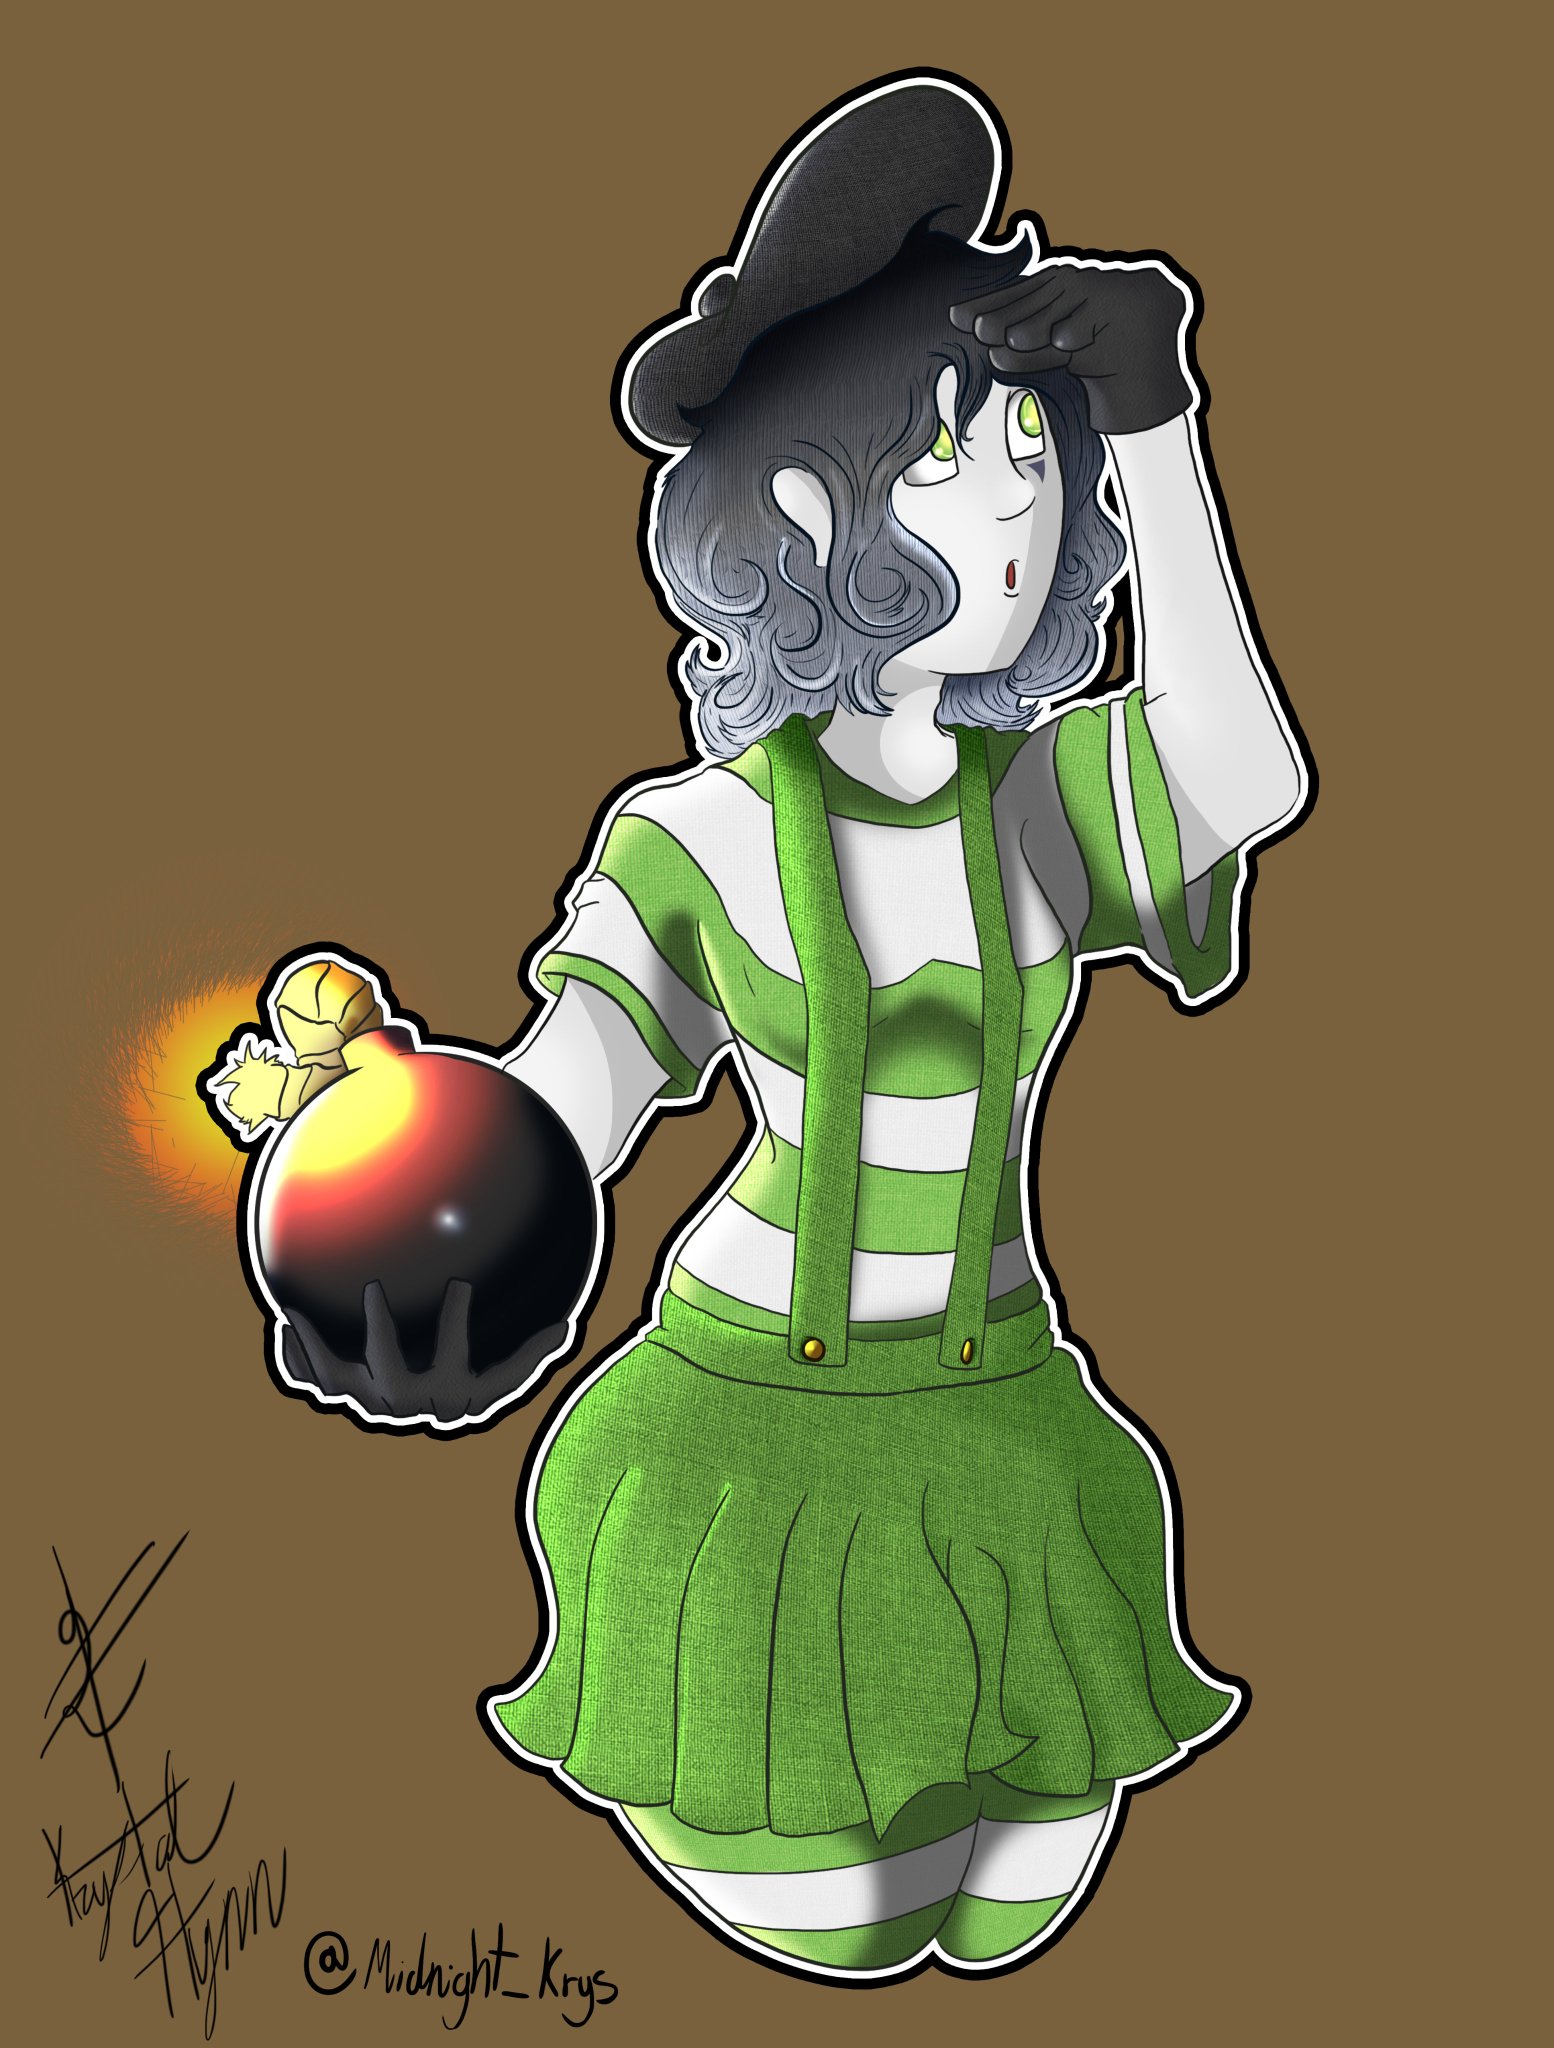 Midnightkrystal On Twitter Hi Roblox Robloxart Arsenal Art Again But Hey It S Not Scarecrow This Time At Least I Know I M Meant To Finish Red Panda And Brute But Aaaaaaaaa Mime - mimes roblox